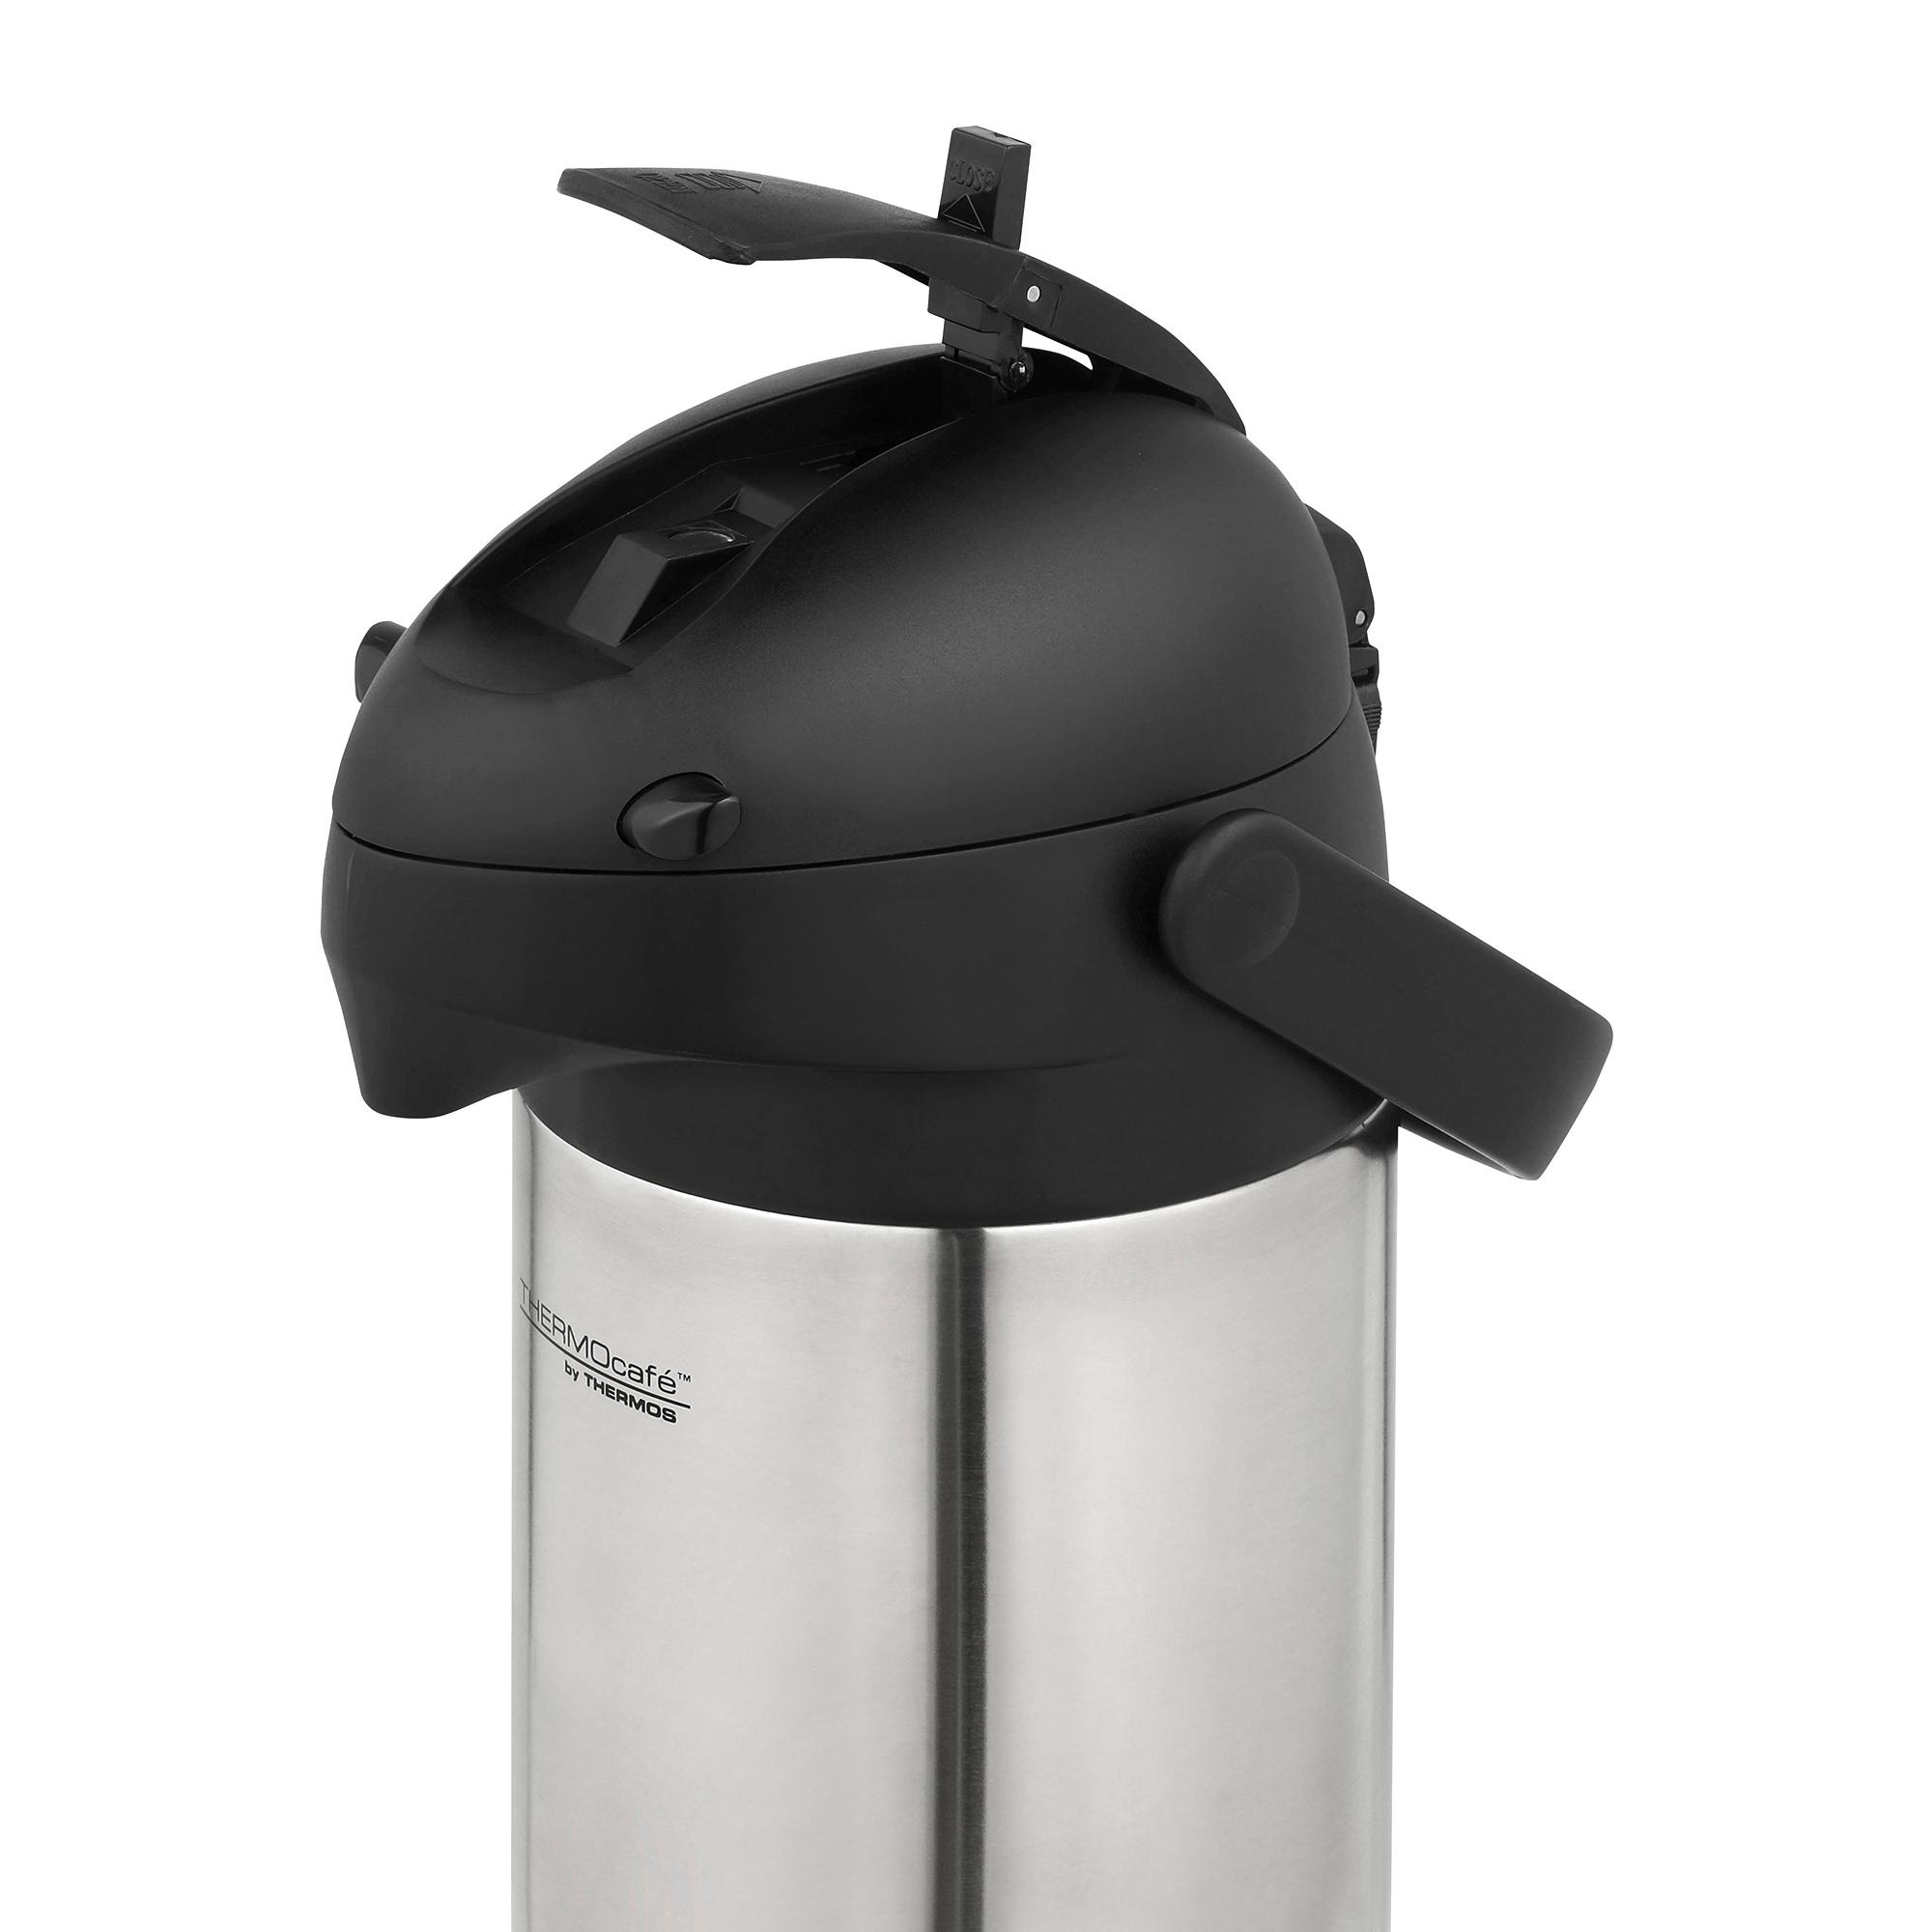 Thermos Thermocafe Insulated Pump Pot 2.5L Image 3